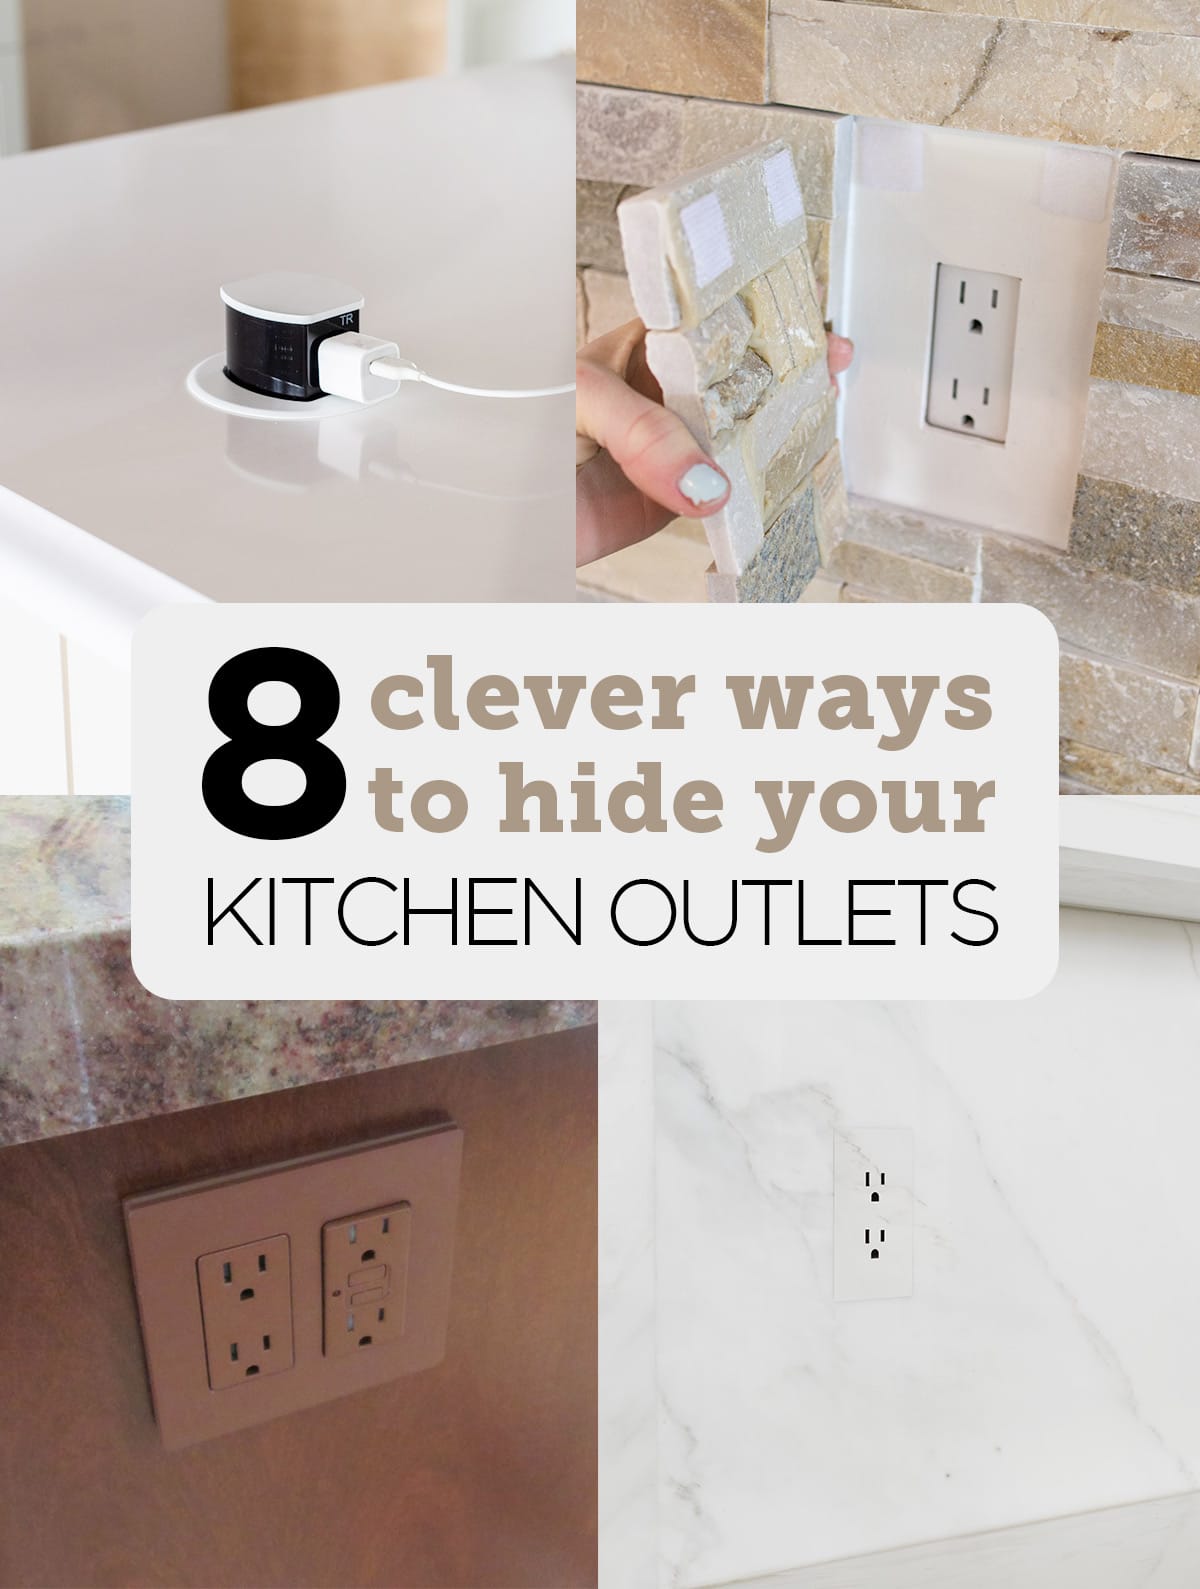 8 Clever Ways to Hide Kitchen Outlets - Jenna Sue Design